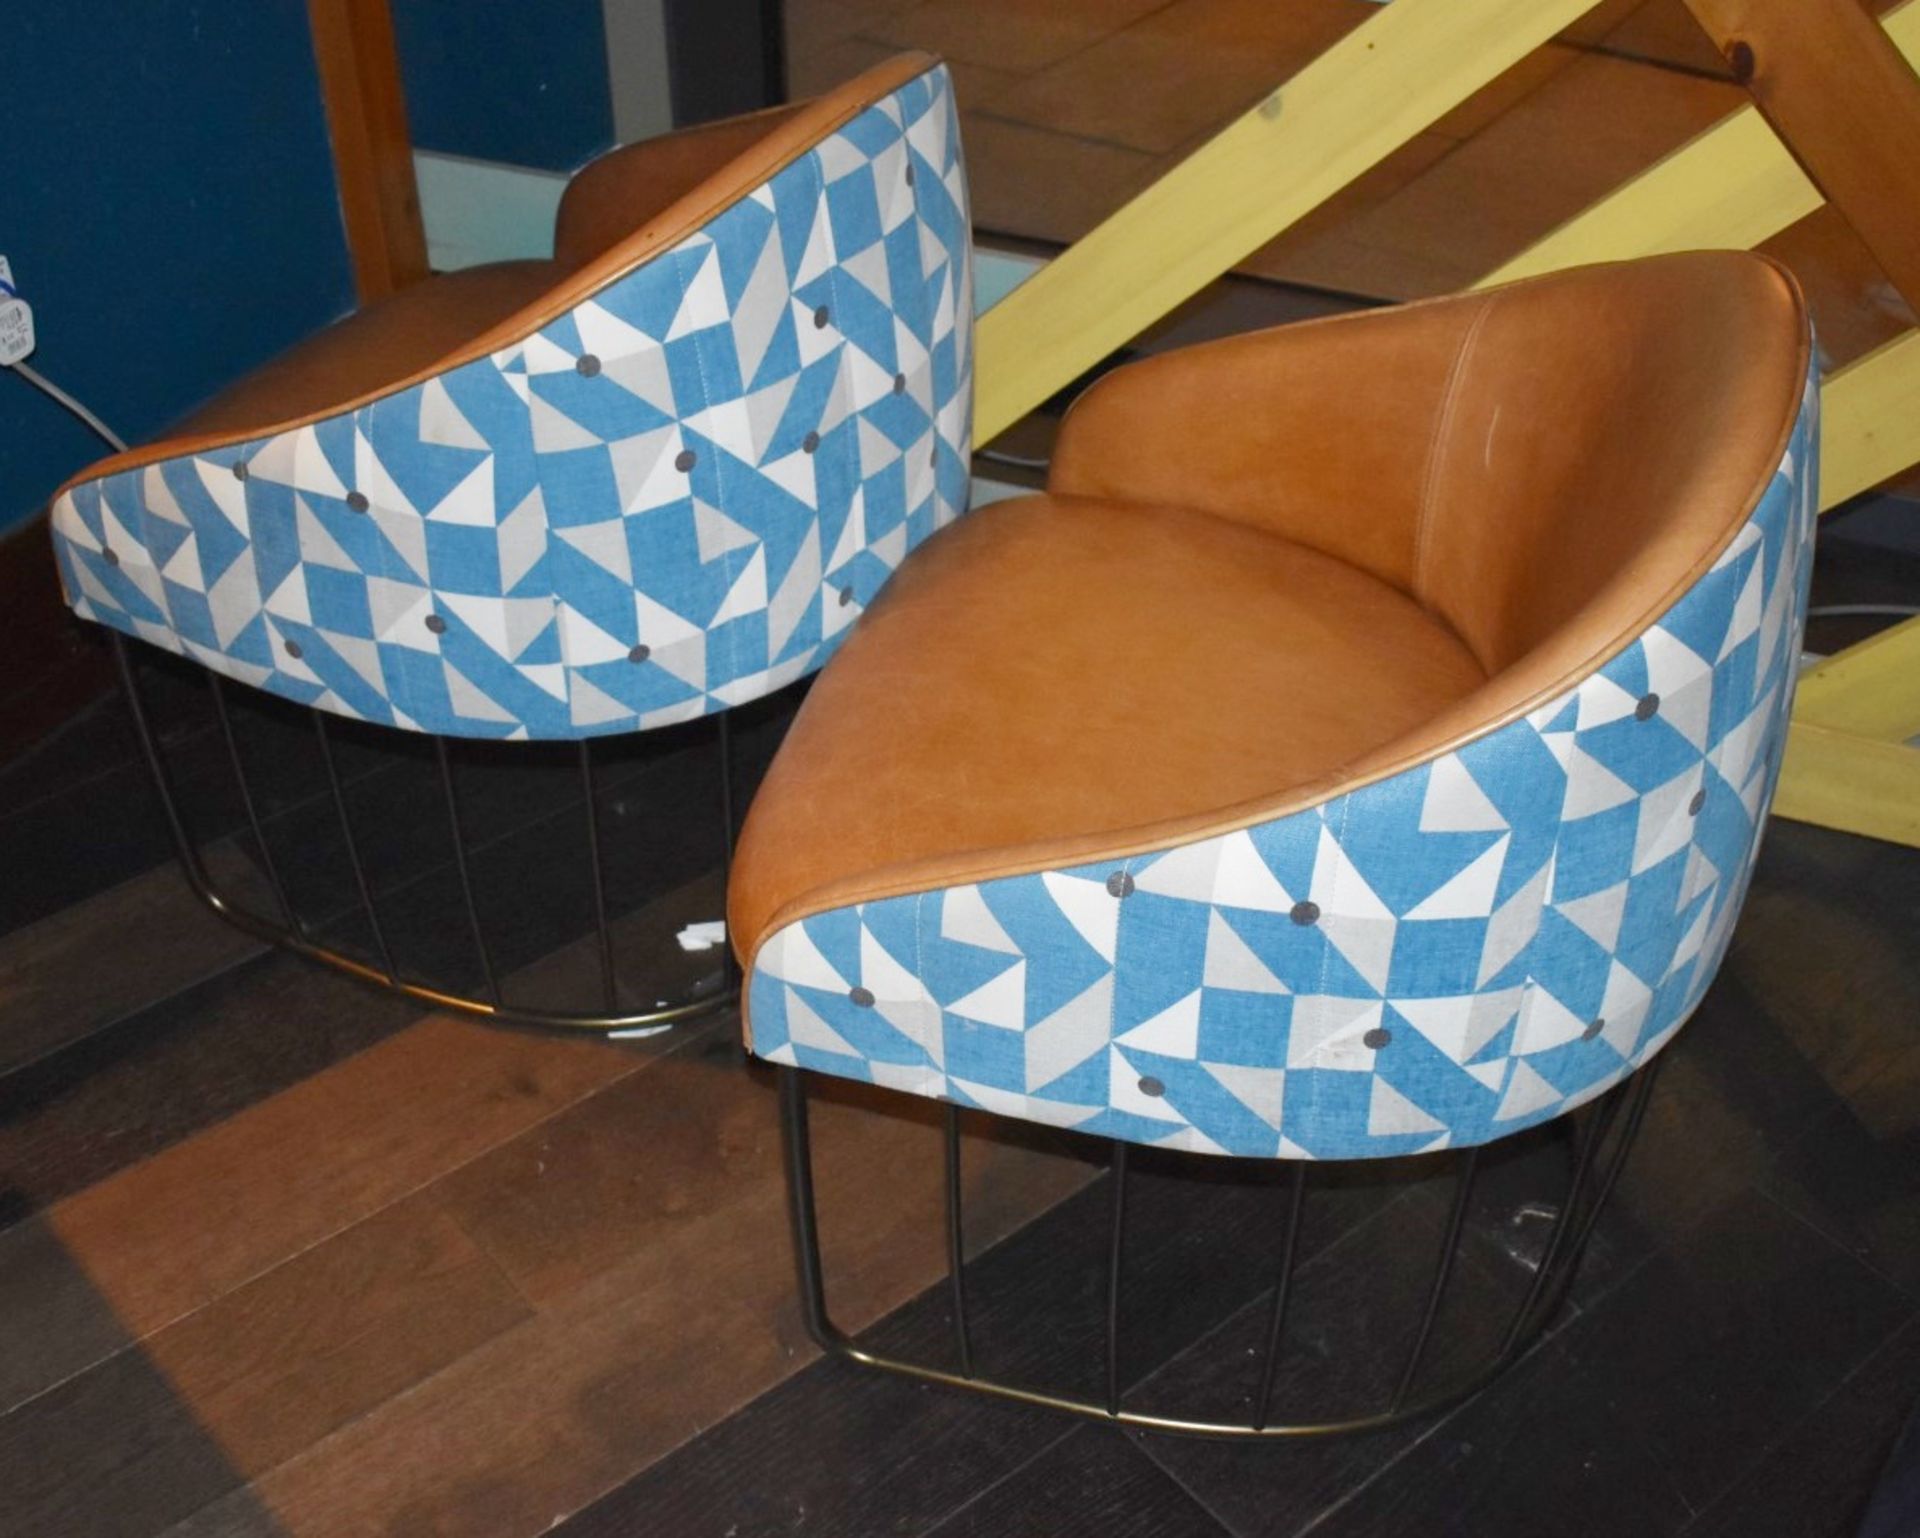 3 x Designer Sancal Lounge Chairs - Perfect for the Home, Hotels, Restaurants - Tan Seath With - Image 3 of 6